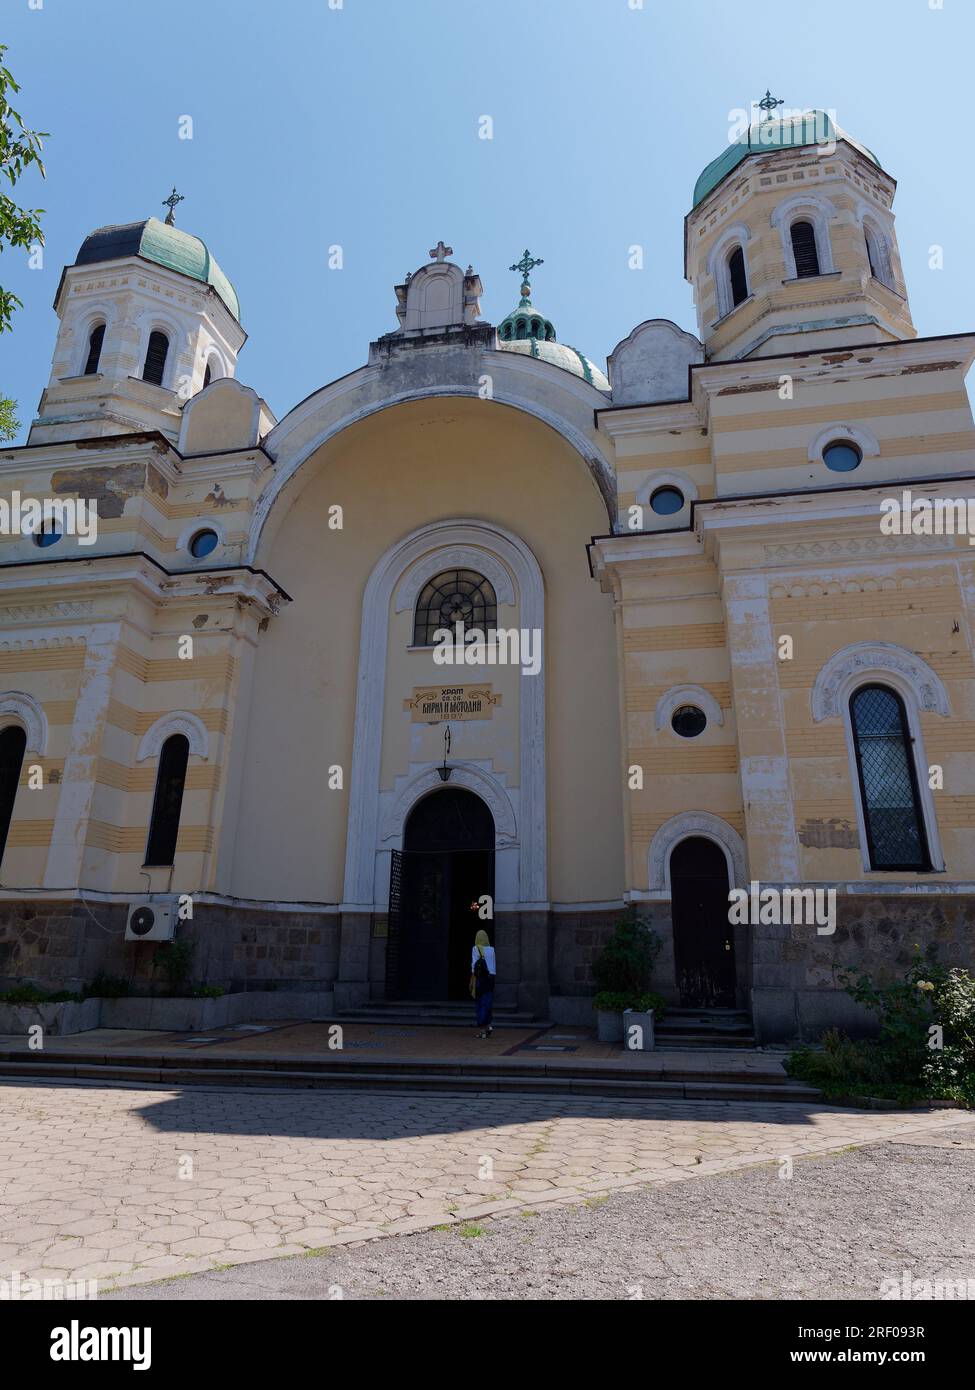 Saints Cyril and Methodius Church / Temple in the Tolerance Zone area of the city of Sofia, Bulgaria, July 30, 2023 Stock Photo